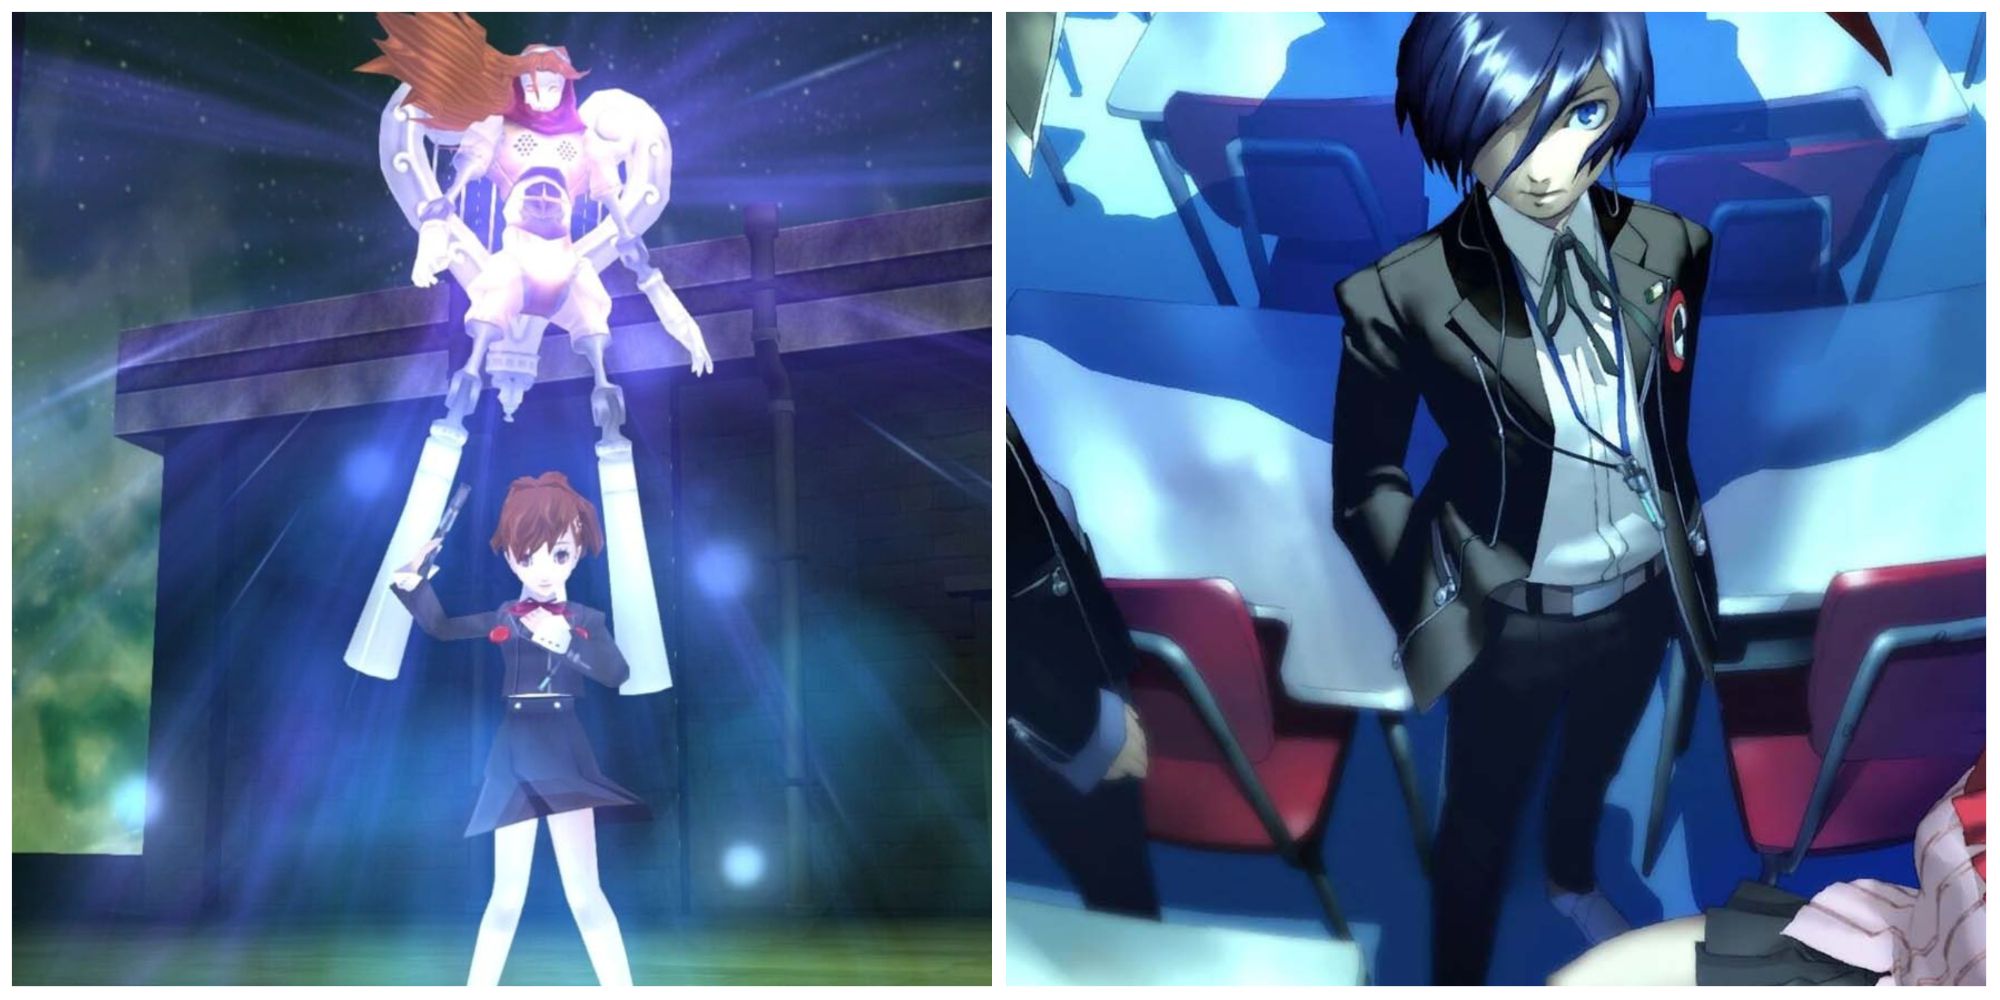 Persona 3 Portable: Best Ways To Make Use Of Your Time